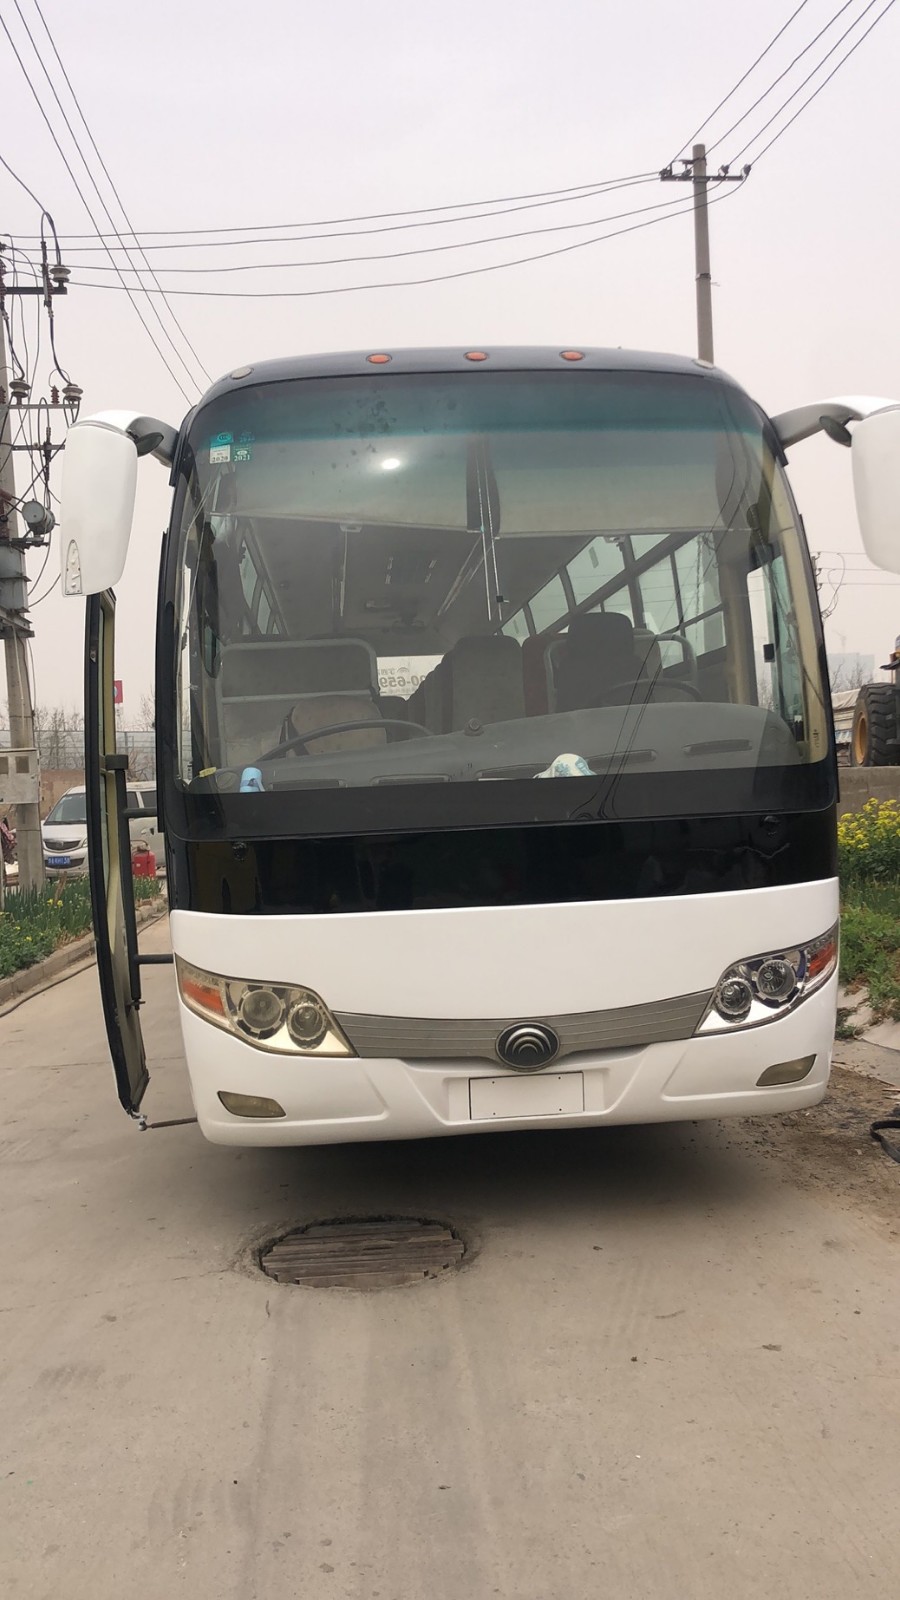 Used Yutong Passenger City Buses Second Hand Urban Diesel Buses Used LHD Tour Coach Buses